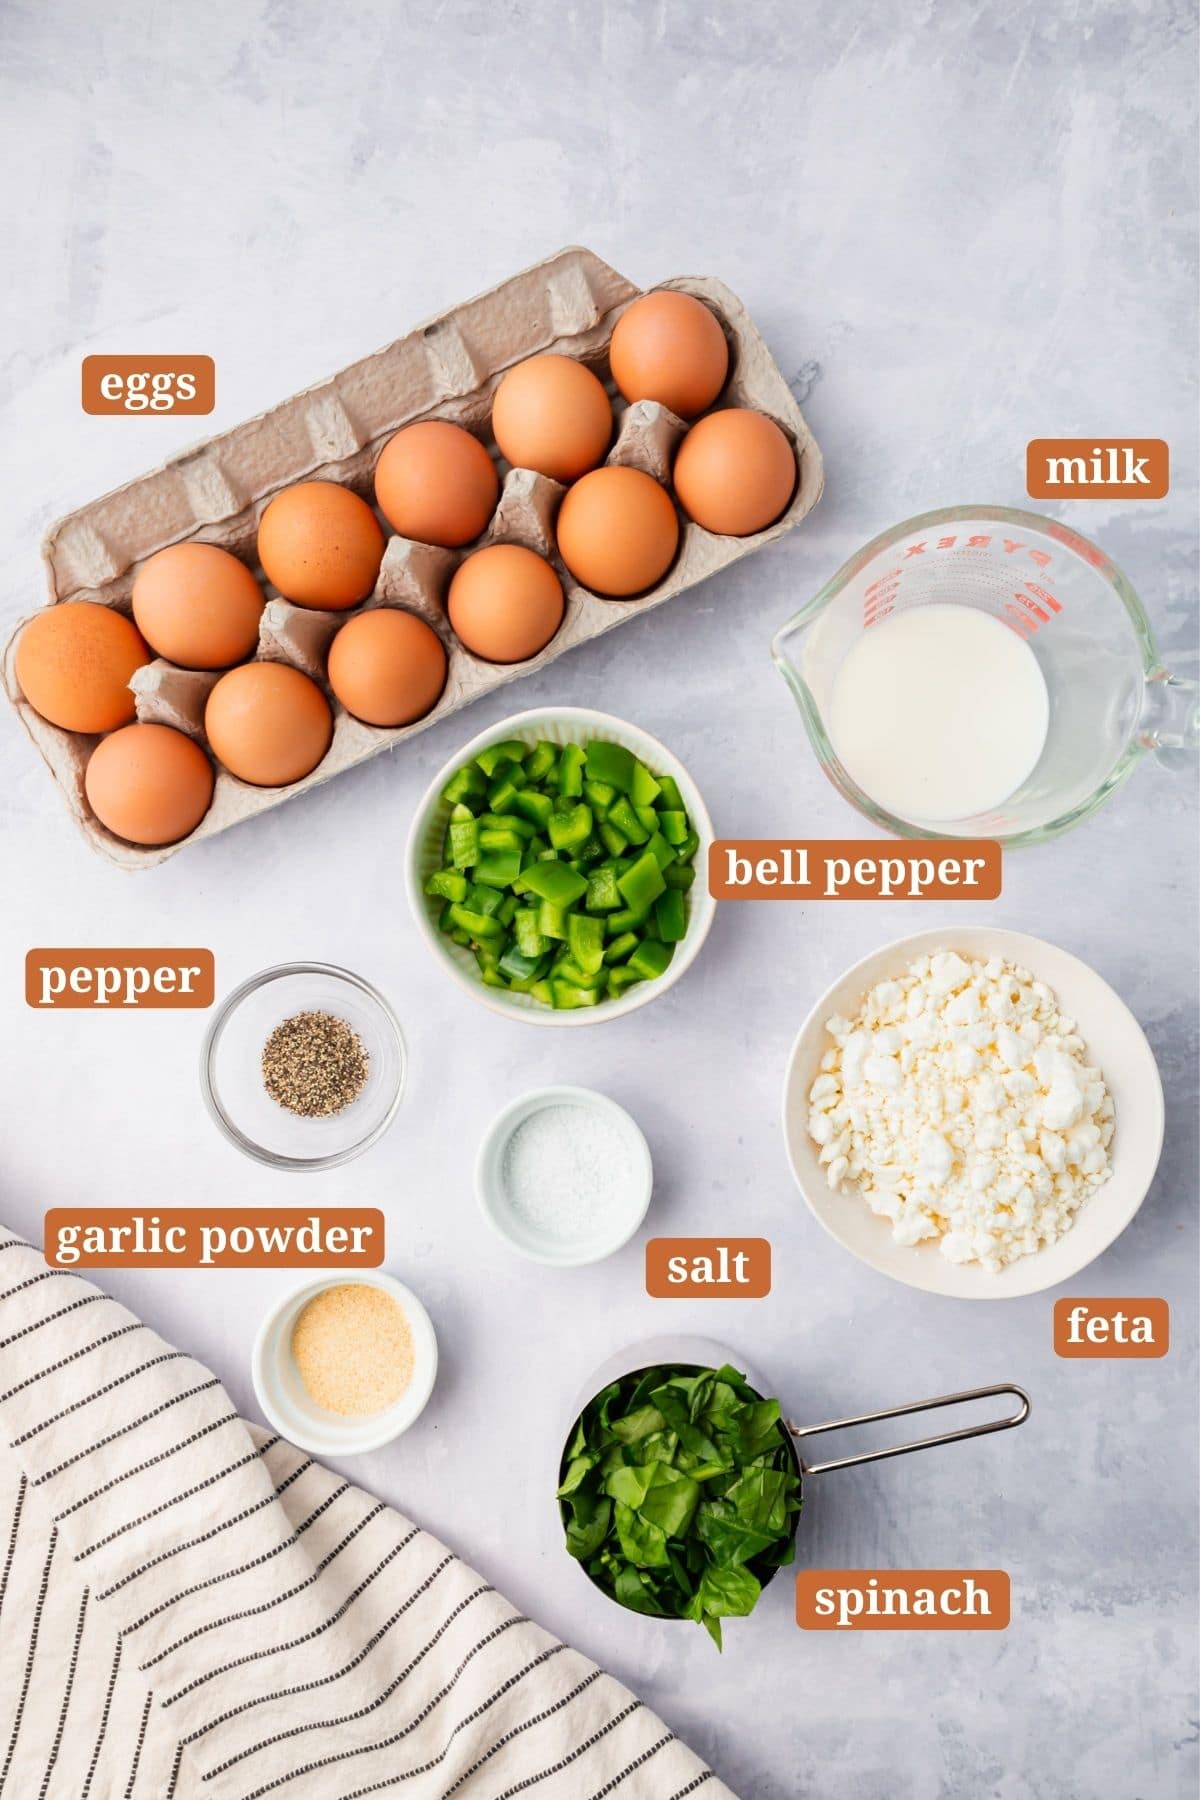 The ingredients needed for making spinach feta egg muffins.